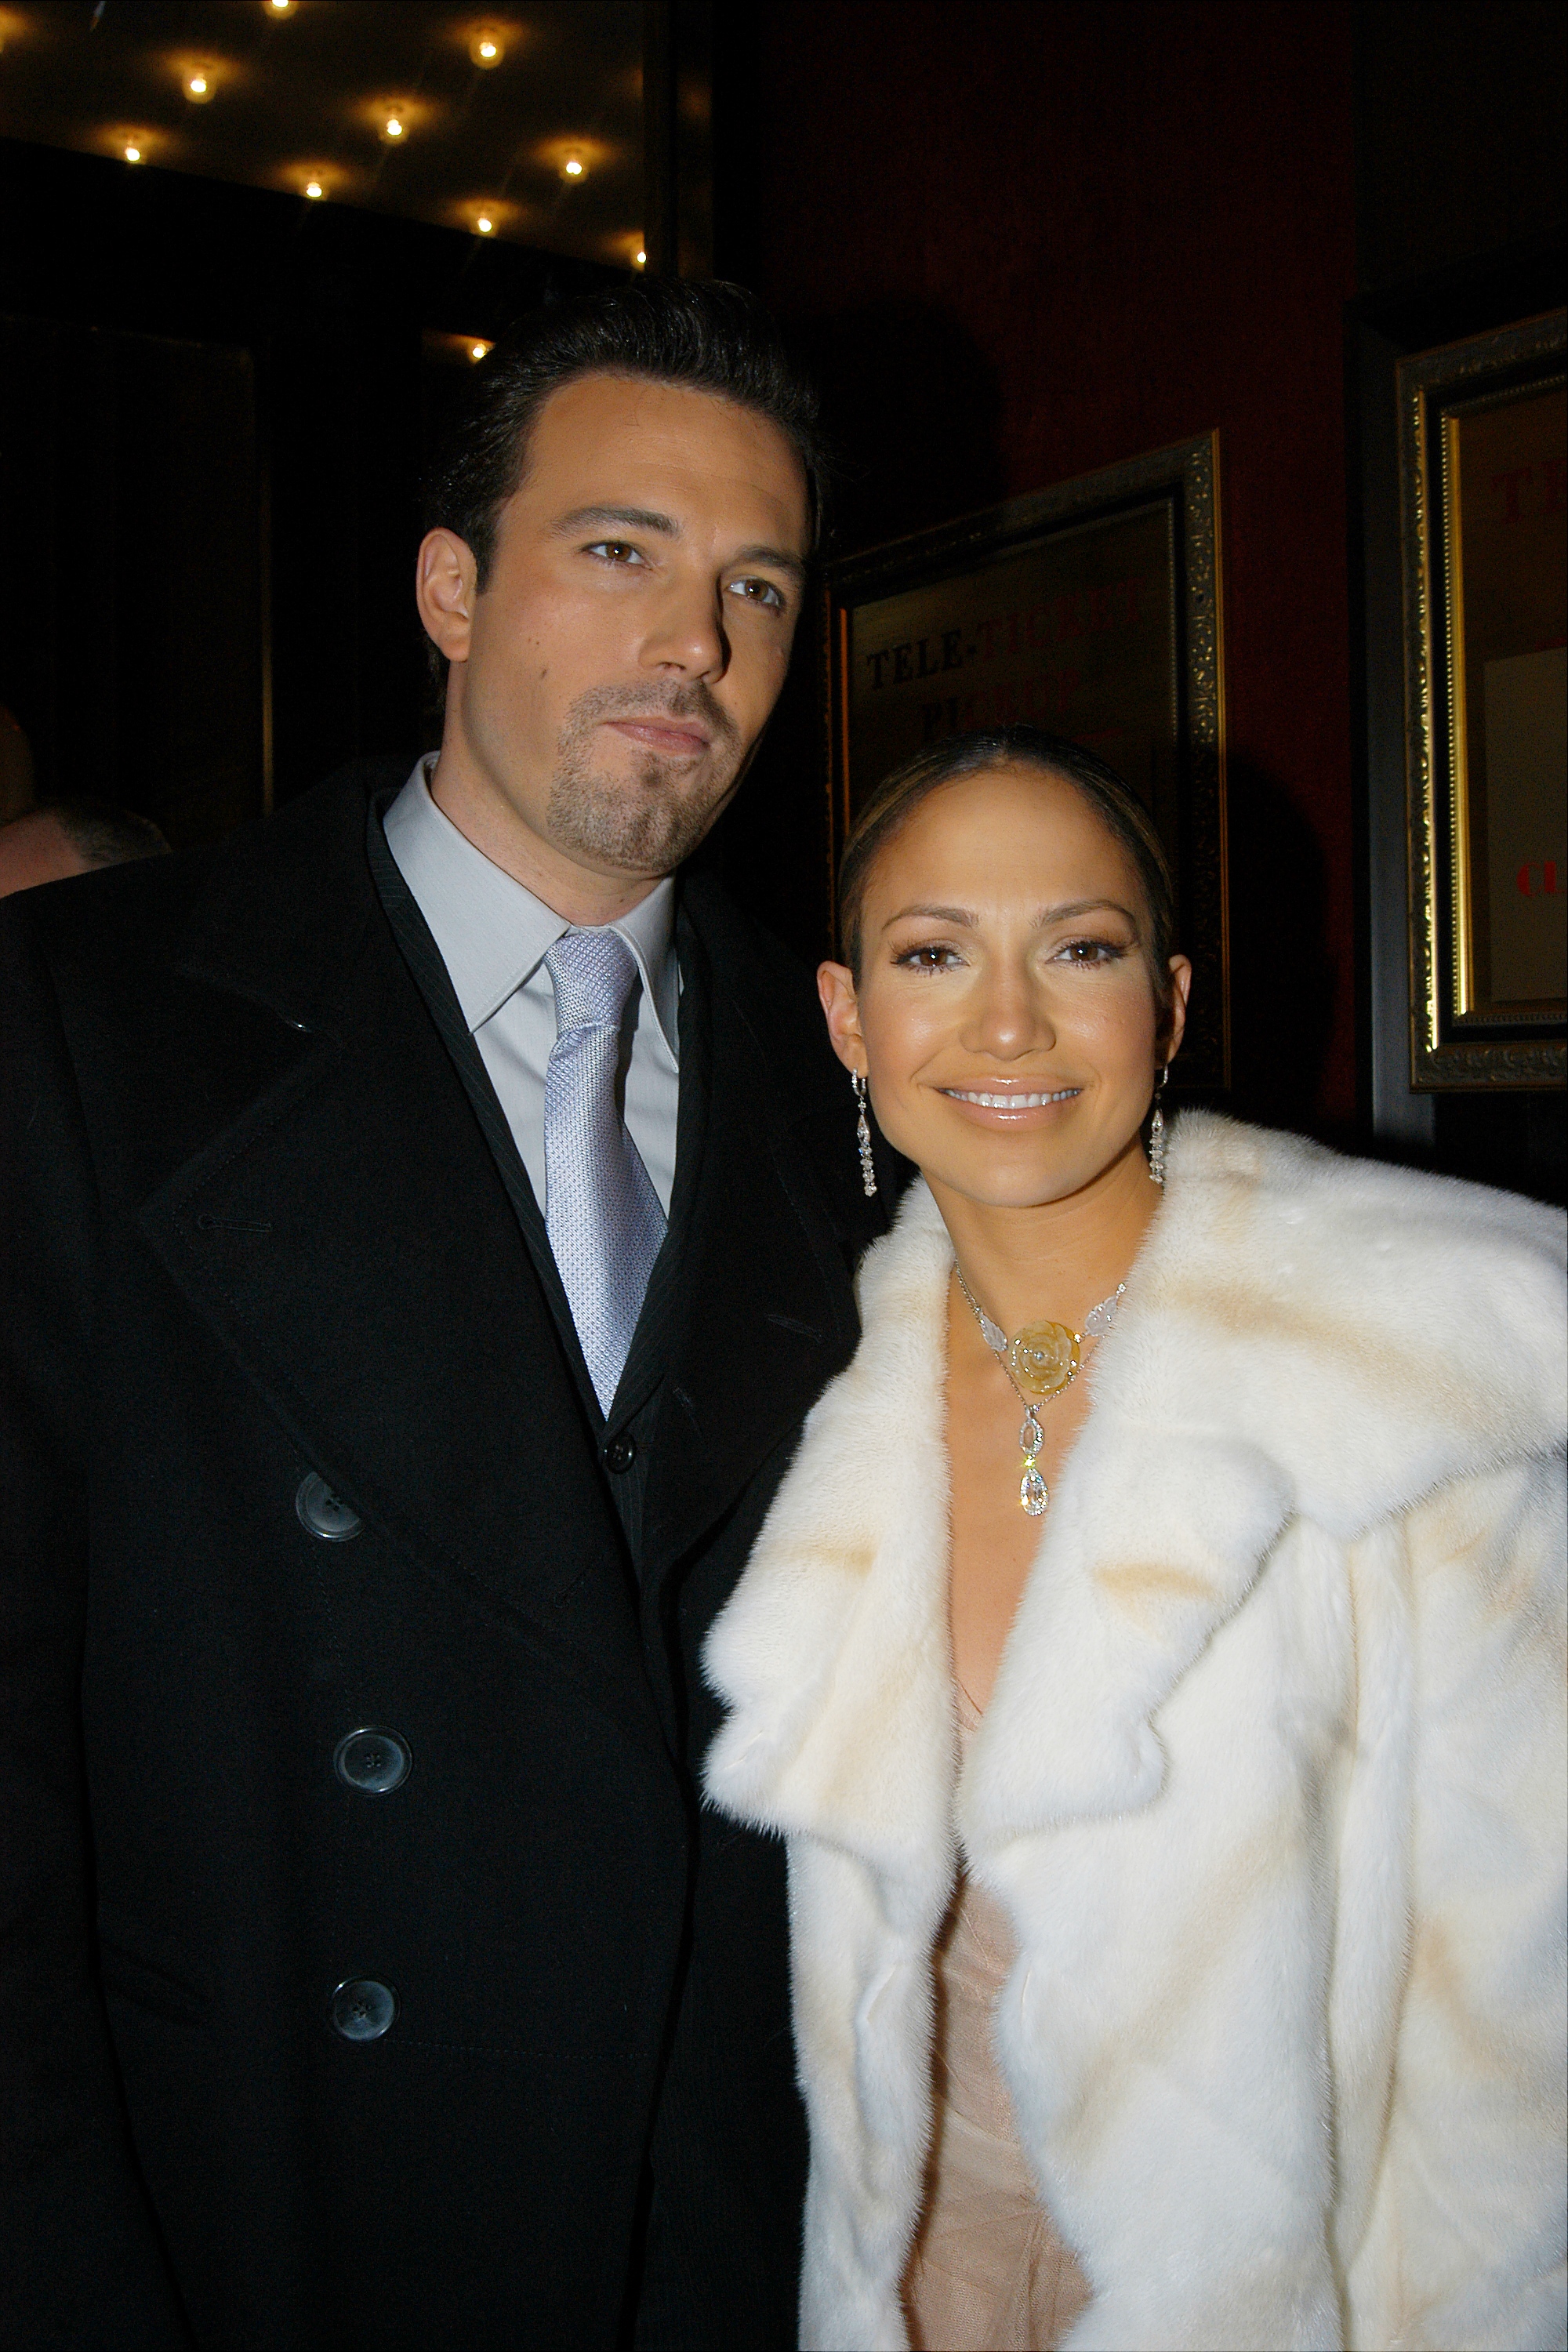 Ben Affleck and Jennifer Lopez at the premiere of "Maid in Manhattan" in New York City on December 8, 2002 | Source: Getty Images